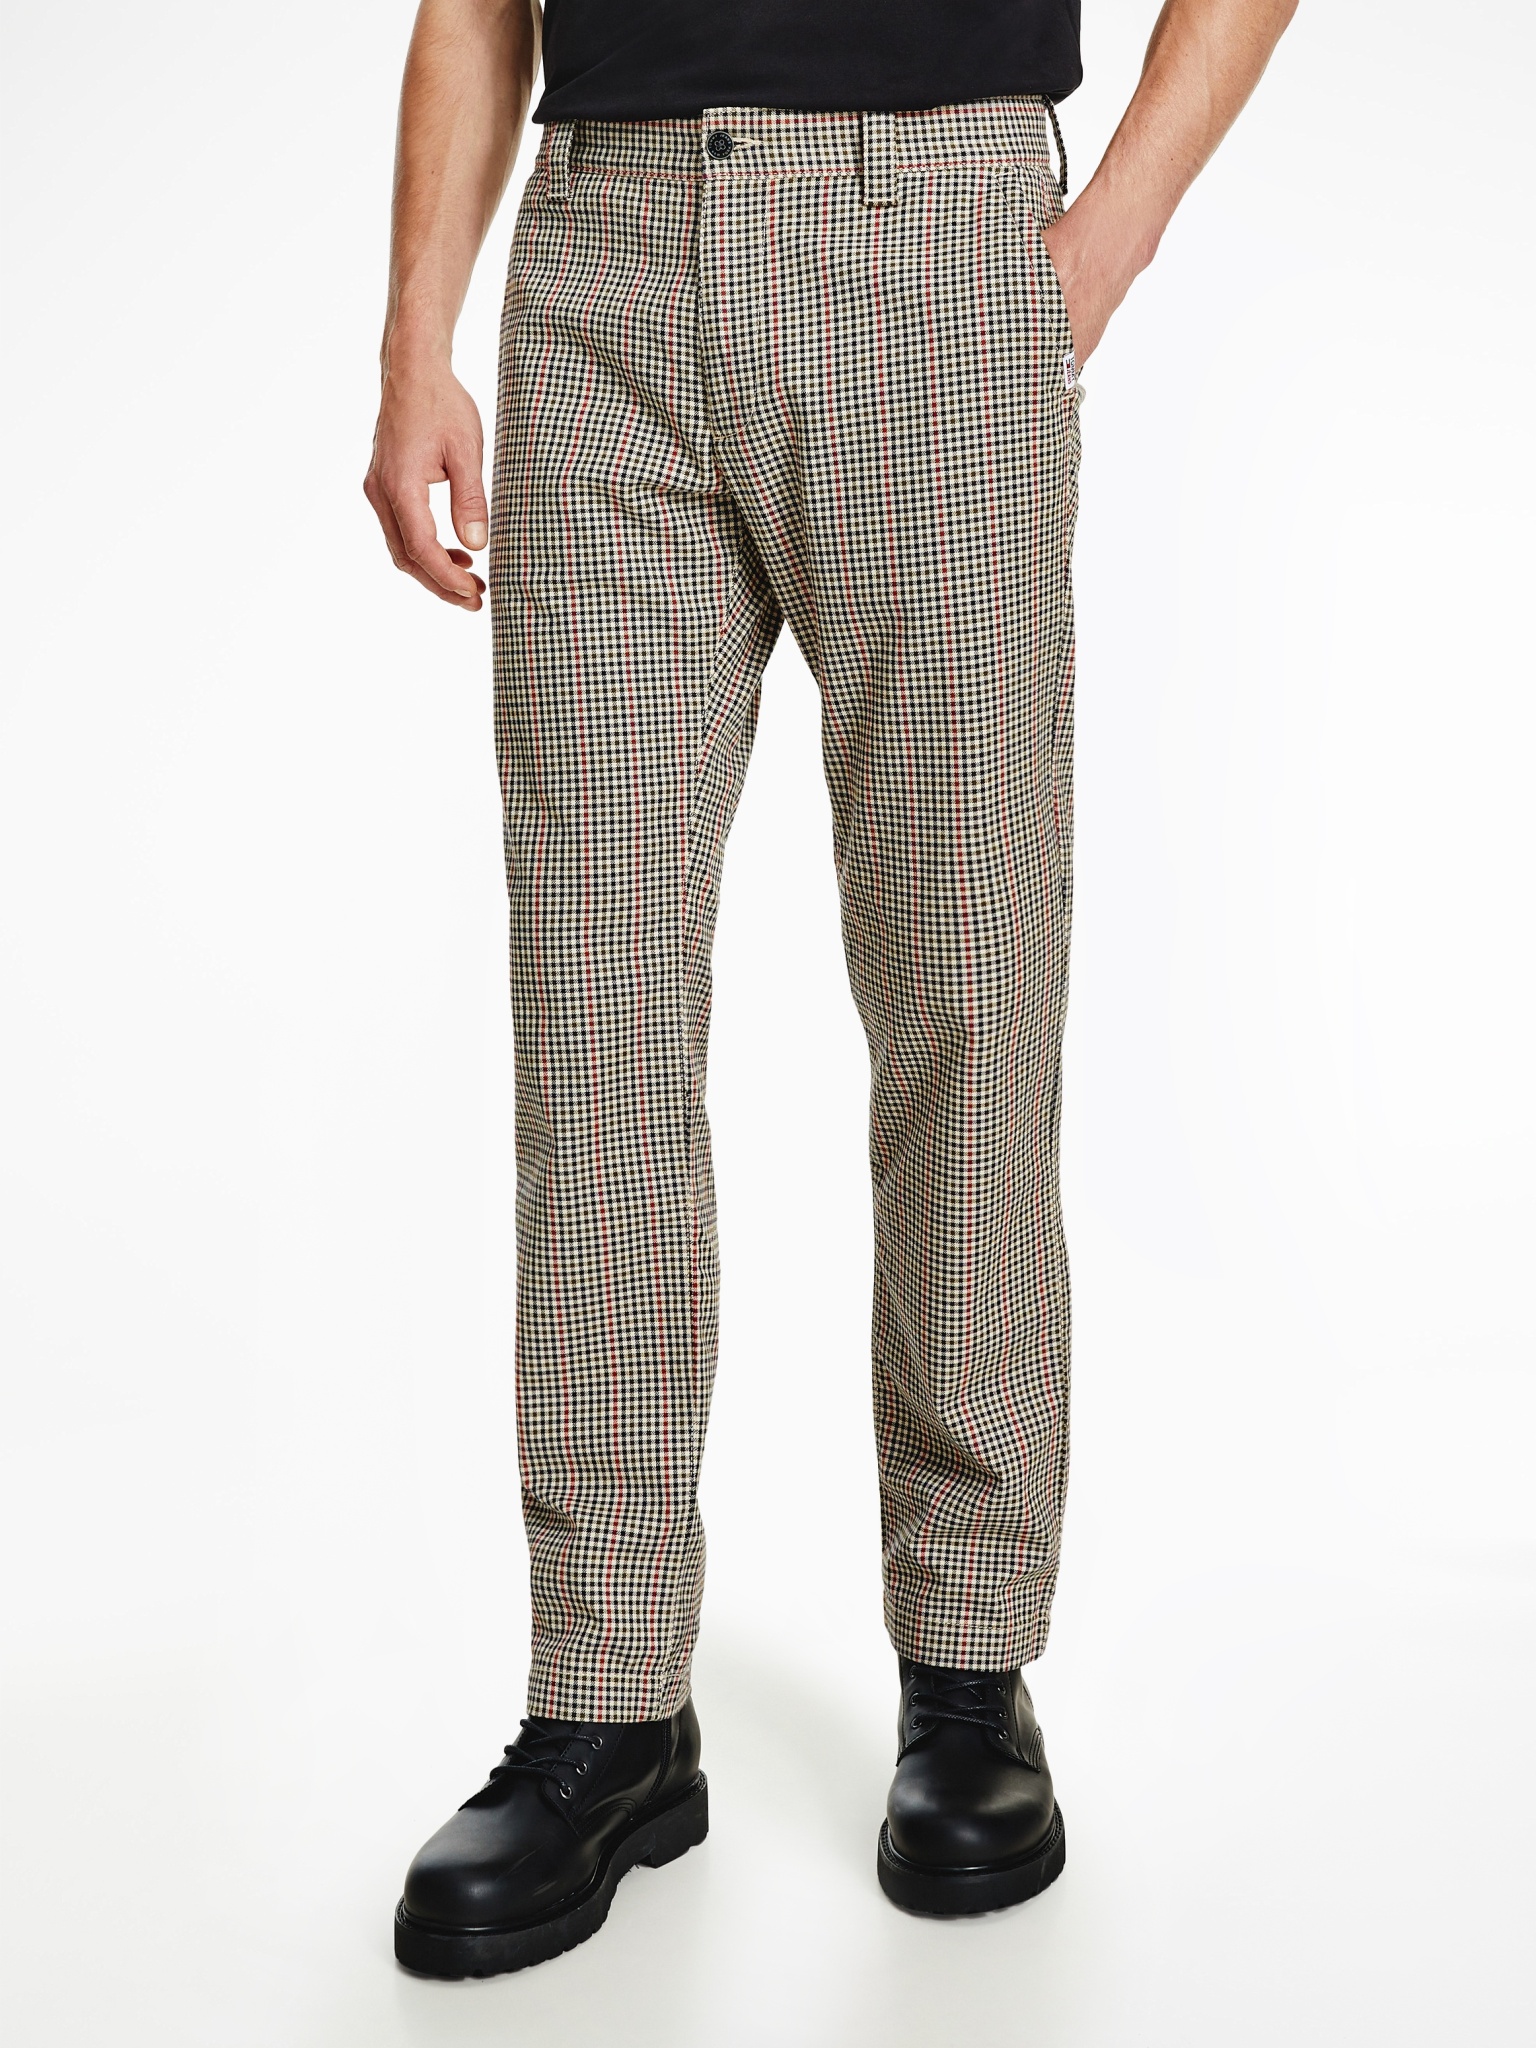 TOMMY JEANS TJM ETHAN SMALL CHECK PANT 10626889